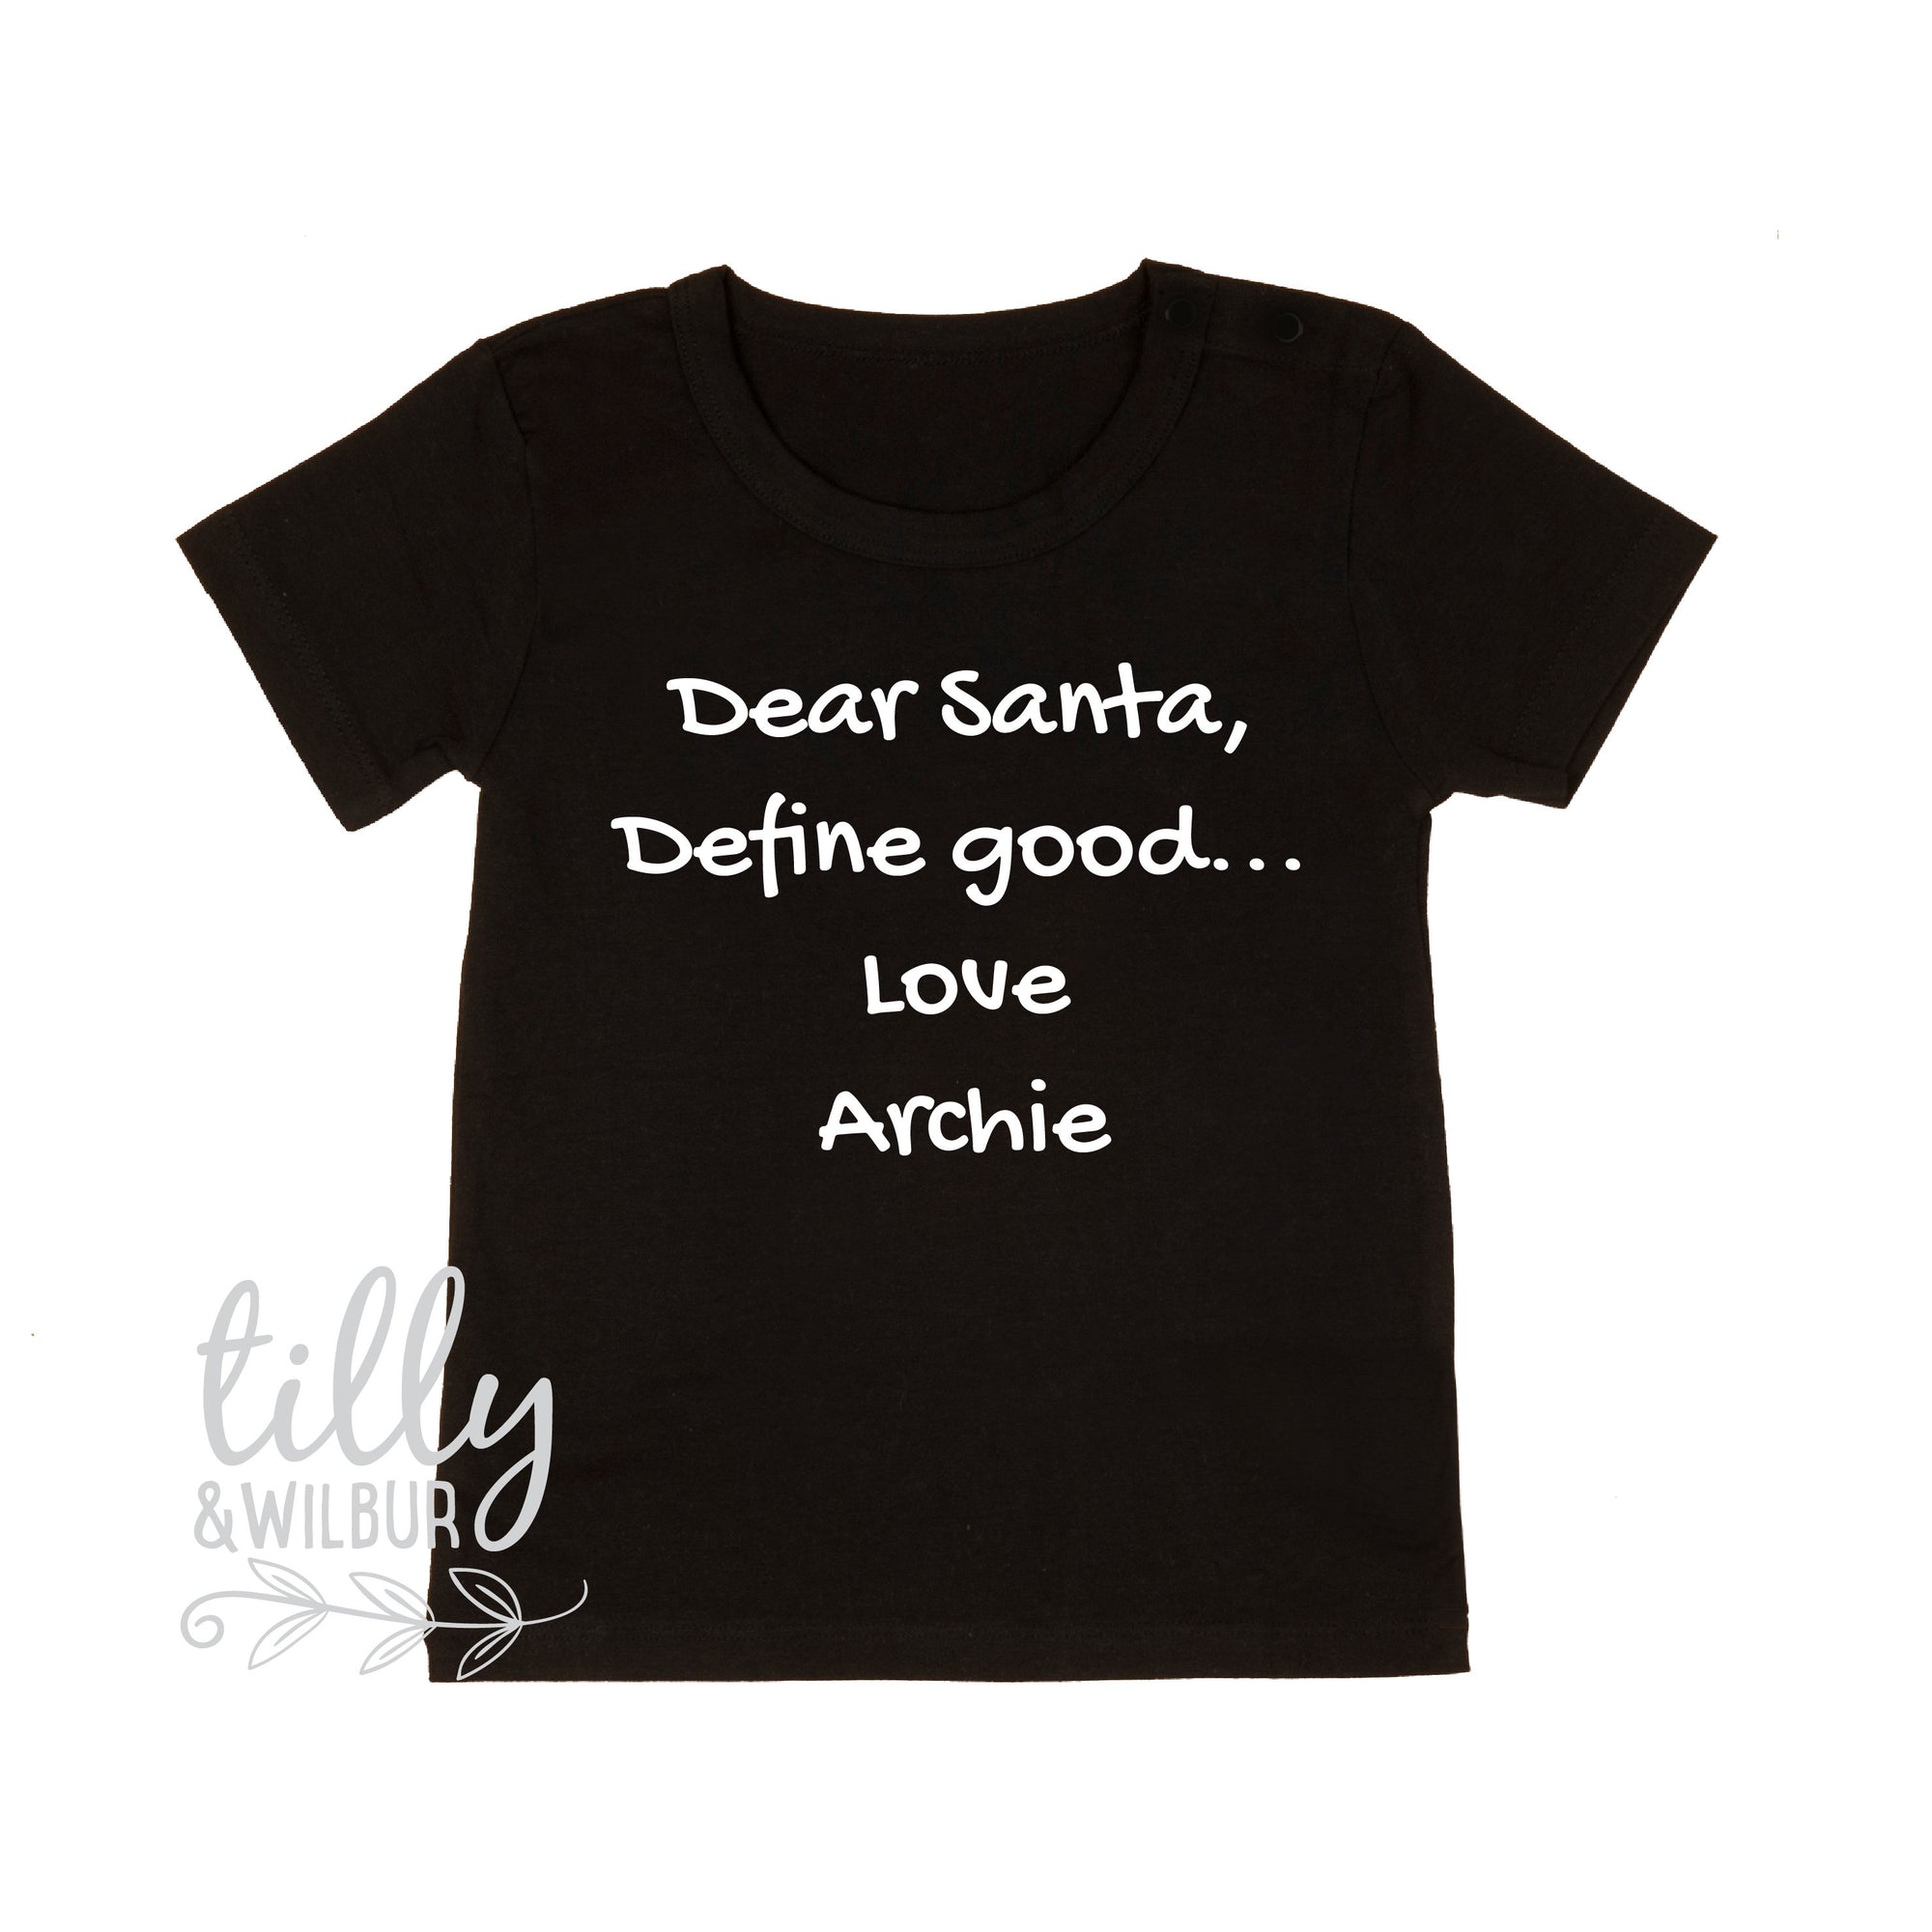 Dear Santa, Define Good... Love... Personalised Christmas T-Shirt, Personalised Shirt With Child's Name, Xmas Gift, Funny Christmas T-Shirt